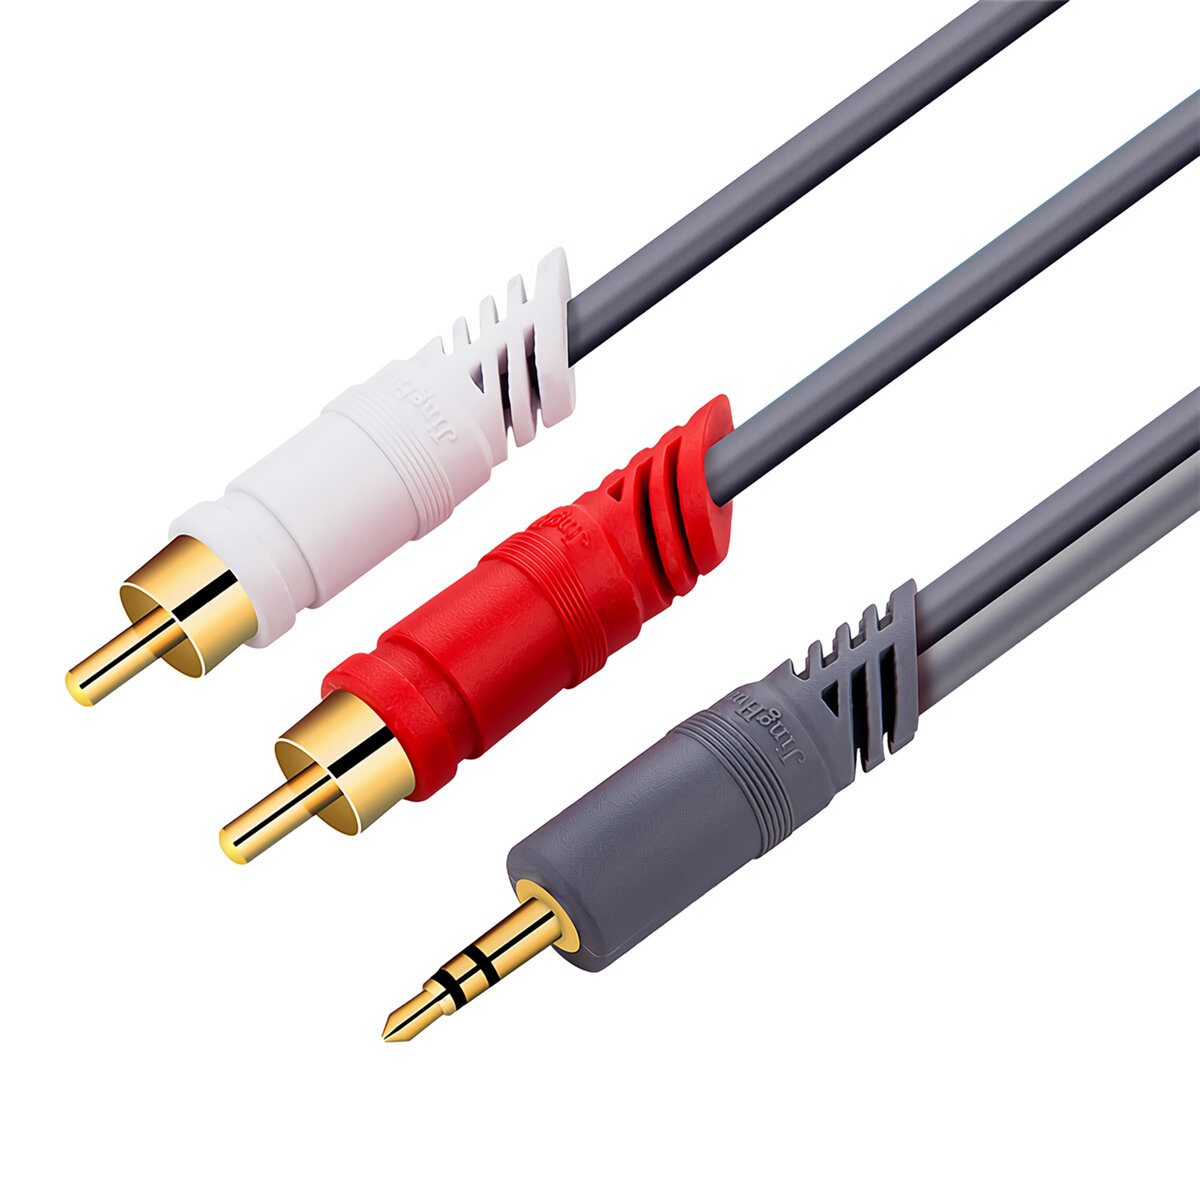 

JINGHUA 3.5mm to 2RCA Audio Cable 3.5mm HiFi Stereo Jack RCA AUX Cable Y Splitter Cable for Mobile Phones Computers Ampl